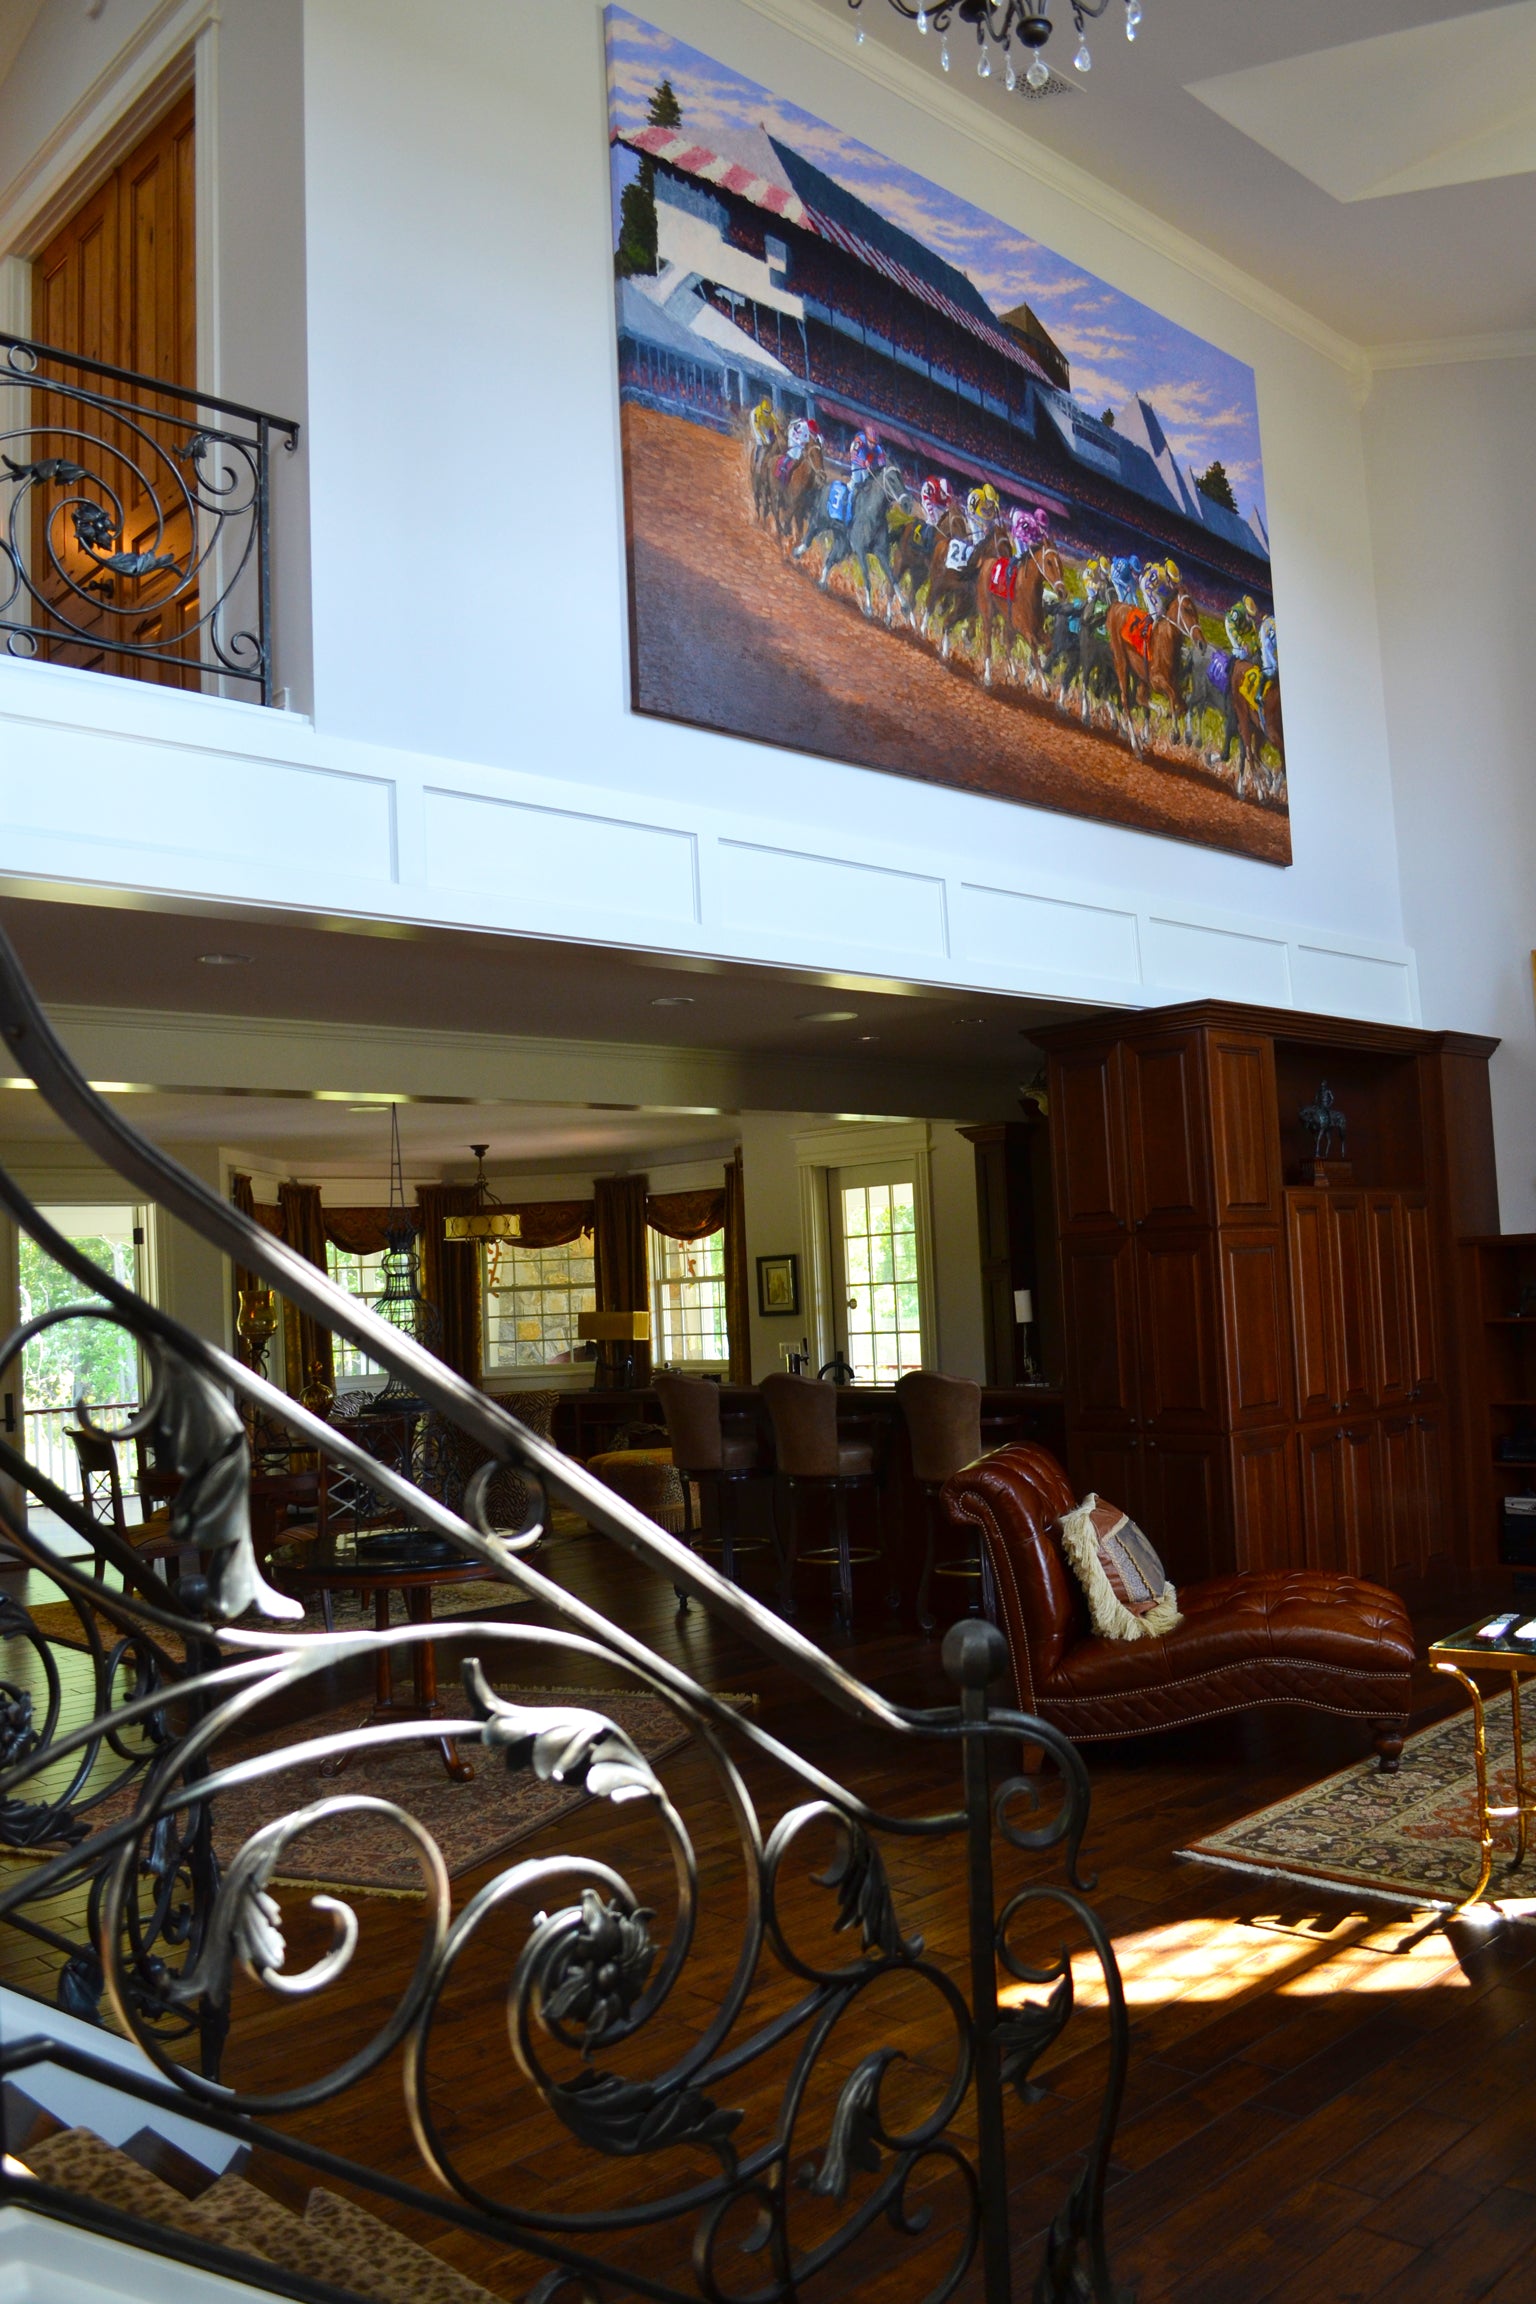 An elegant home interior with a grand Tom Myott painting mounted high on the wall above the entrance to a traditional dining room. The painting vividly portrays a horse racing scene at Saratoga, filled with the energy of mid-race action. Below, the home features rich wood paneling, a leather sofa, and an ornate wrought-iron staircase railing, which adds to the luxury of the space. The artwork serves as a commanding focal point, visible from both the lower and upper levels of the home.